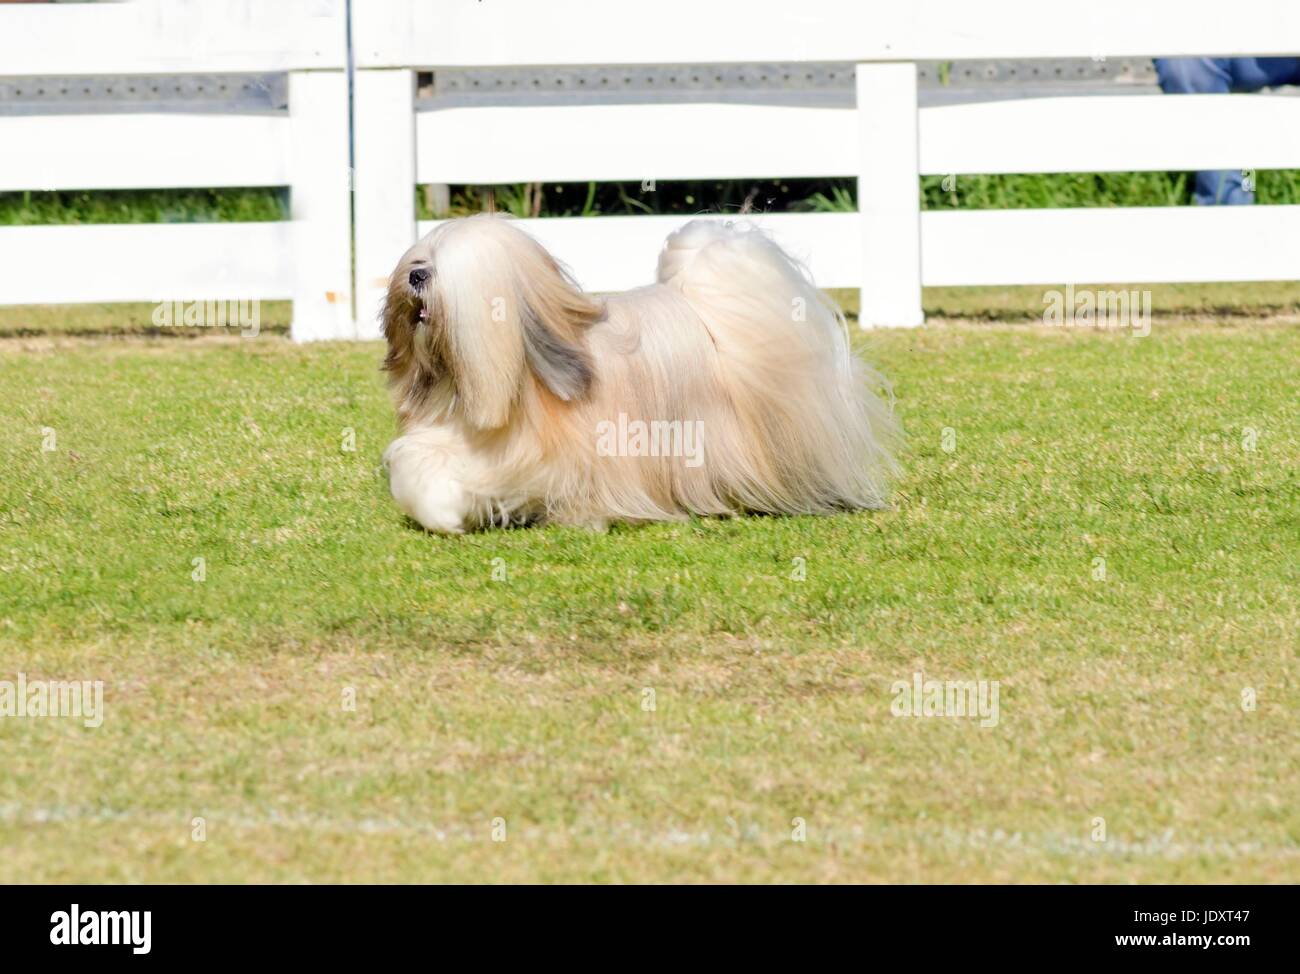 A profile view of a small young light tan, fawn, beige, gray and white Lhasa Apso dog with a long silky coat running on the grass. The long haired, bearded Lasa dog has heavy straight long coat and is a companion dog. Stock Photo